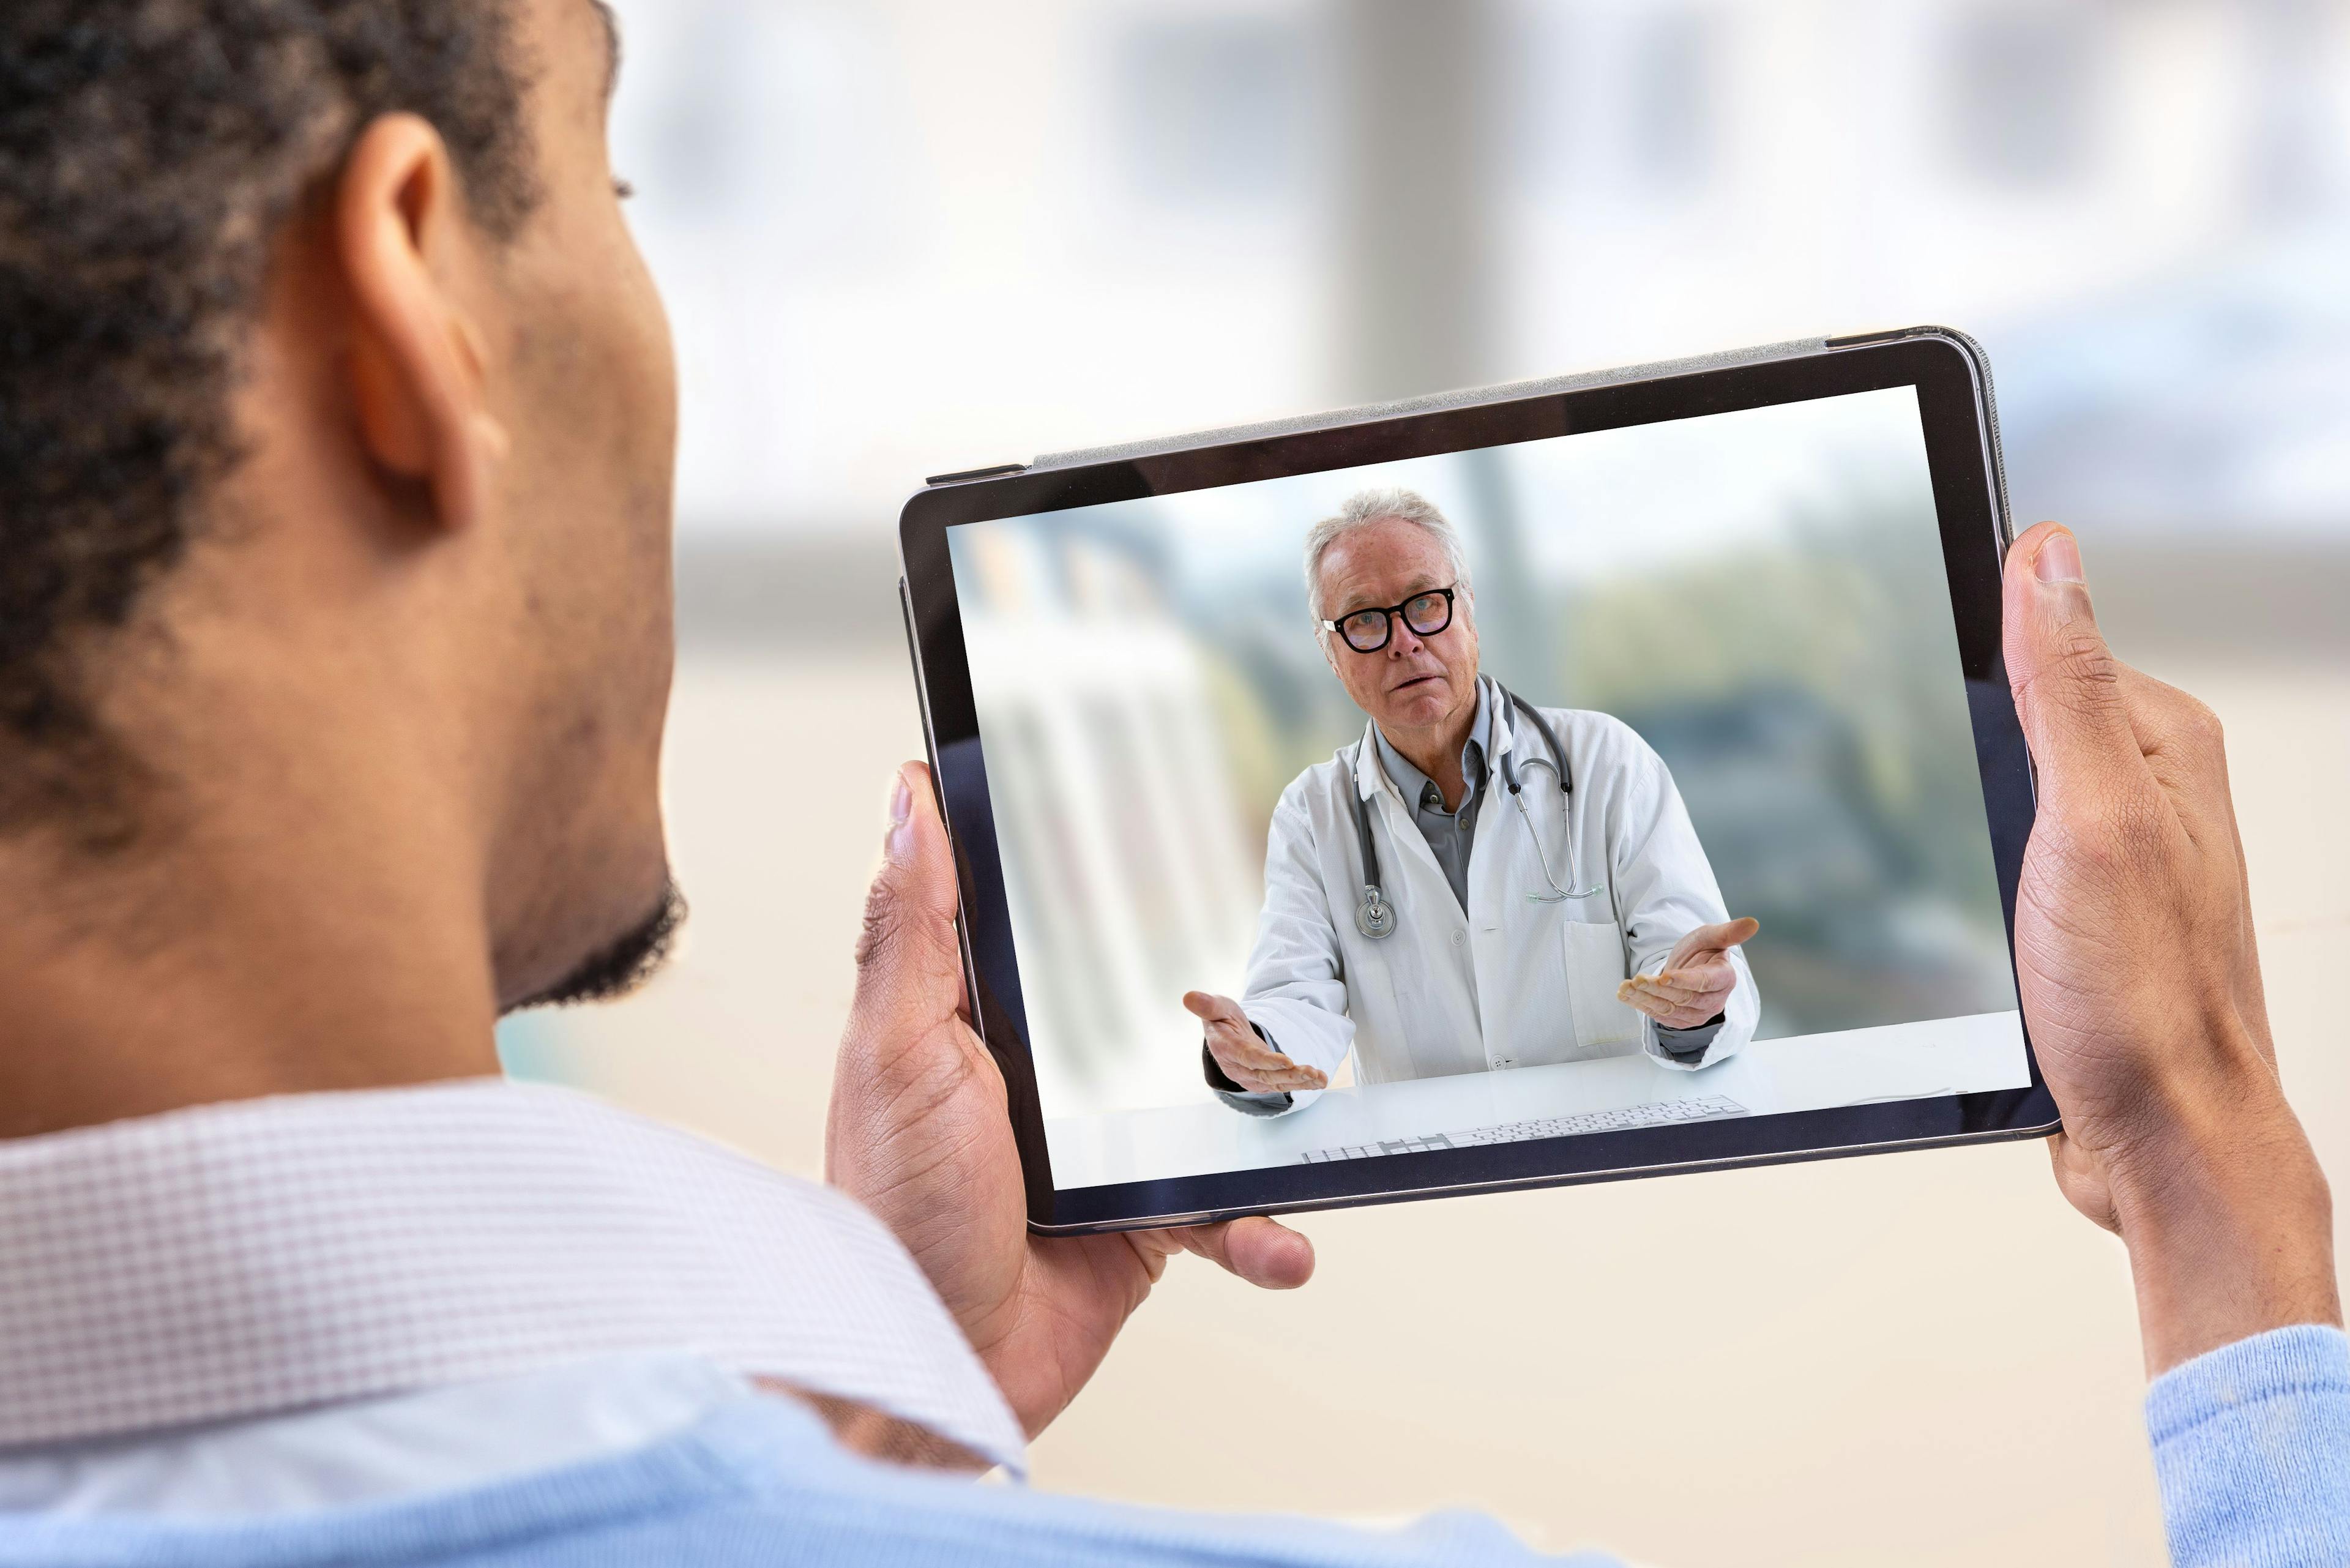 Telemedicine, virtual health consultations, may help increase access to care among under-resourced demographics during the COVID-19 pandemic. 